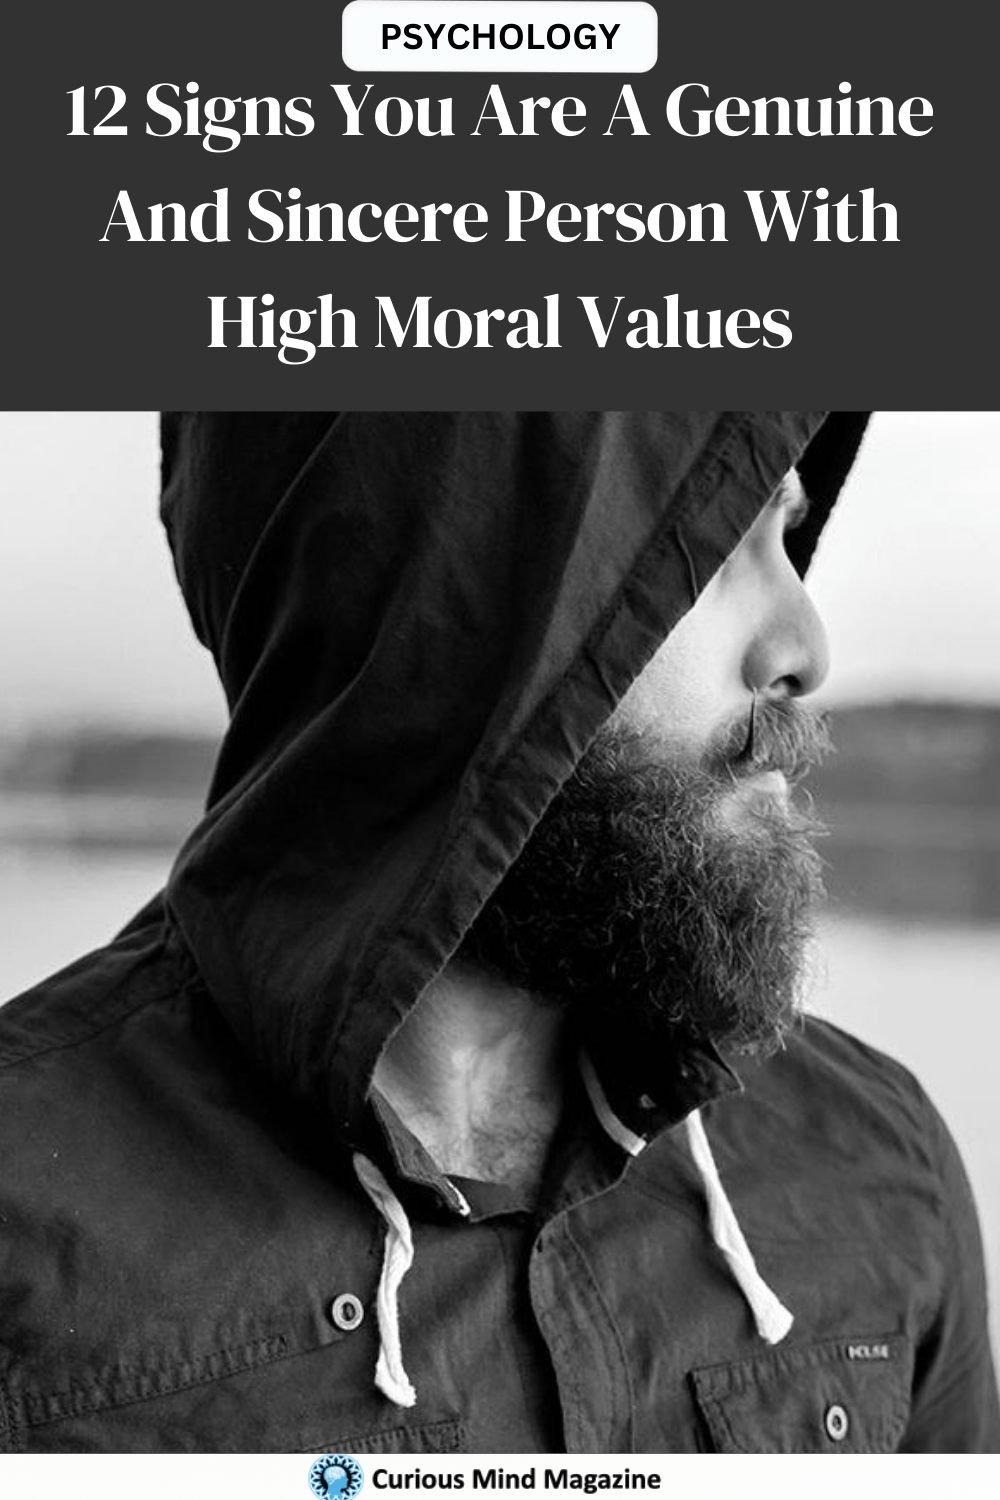 12 Signs You Are A Genuine And Sincere Person With High Moral Values